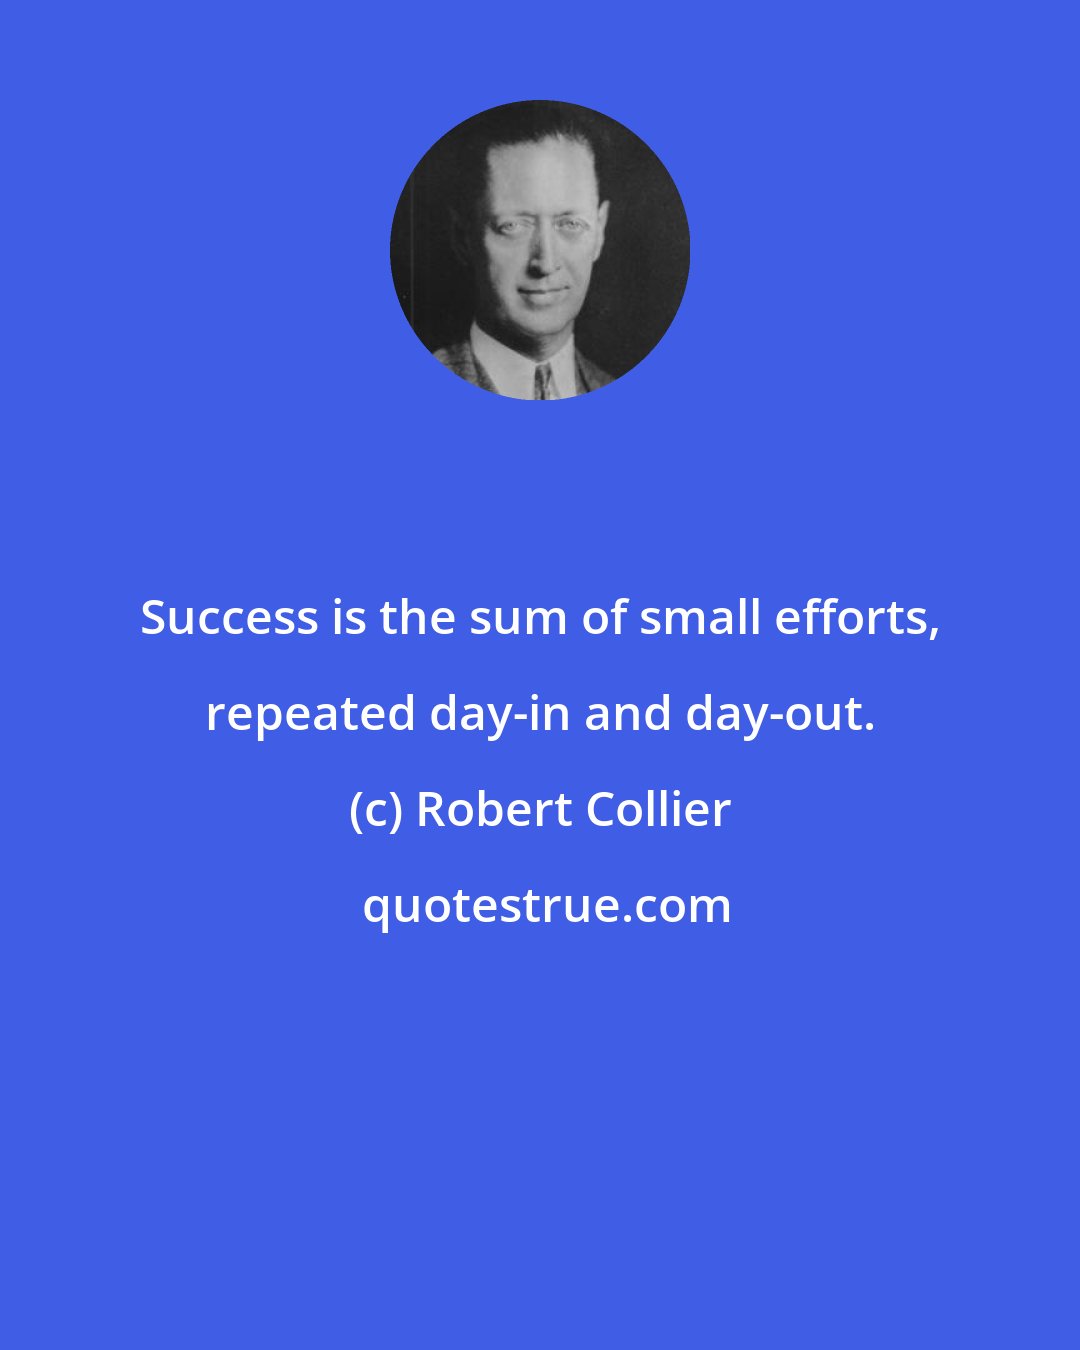 Robert Collier: Success is the sum of small efforts, repeated day-in and day-out.